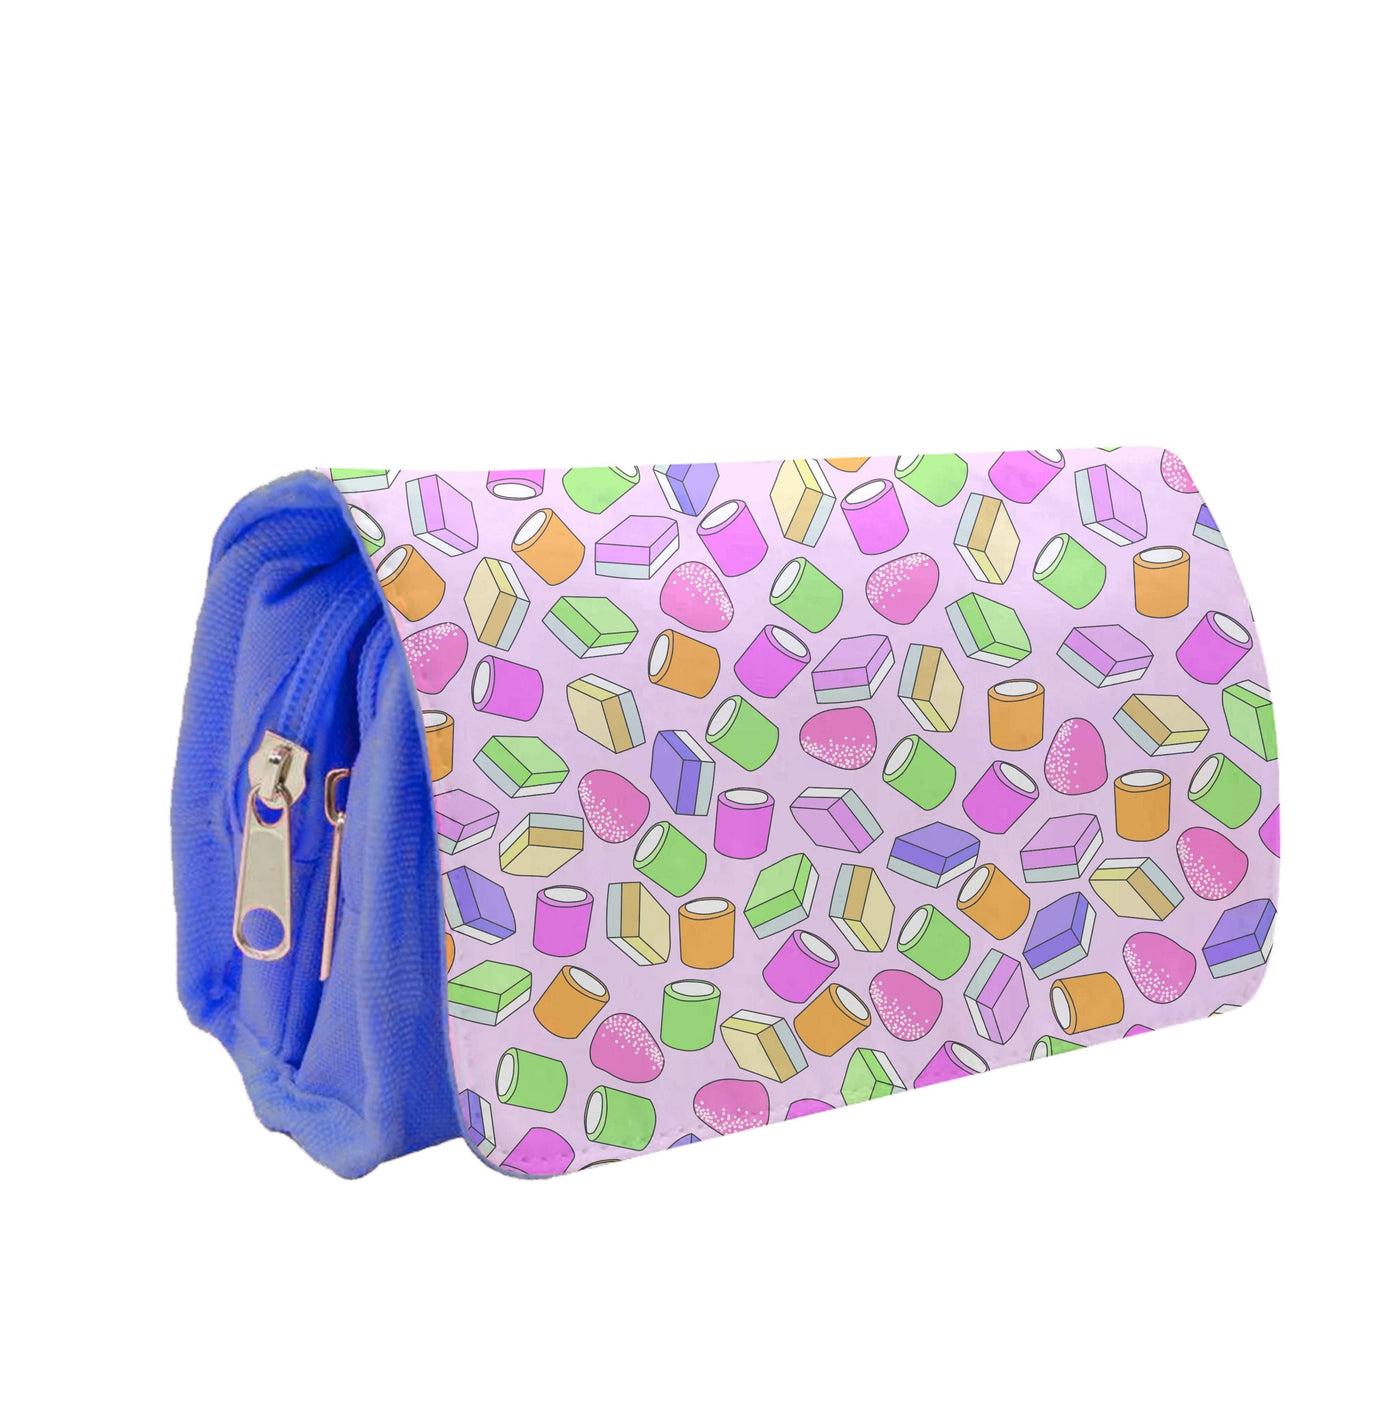 Pink Dolly Mix - Sweets Patterns Pencil Case